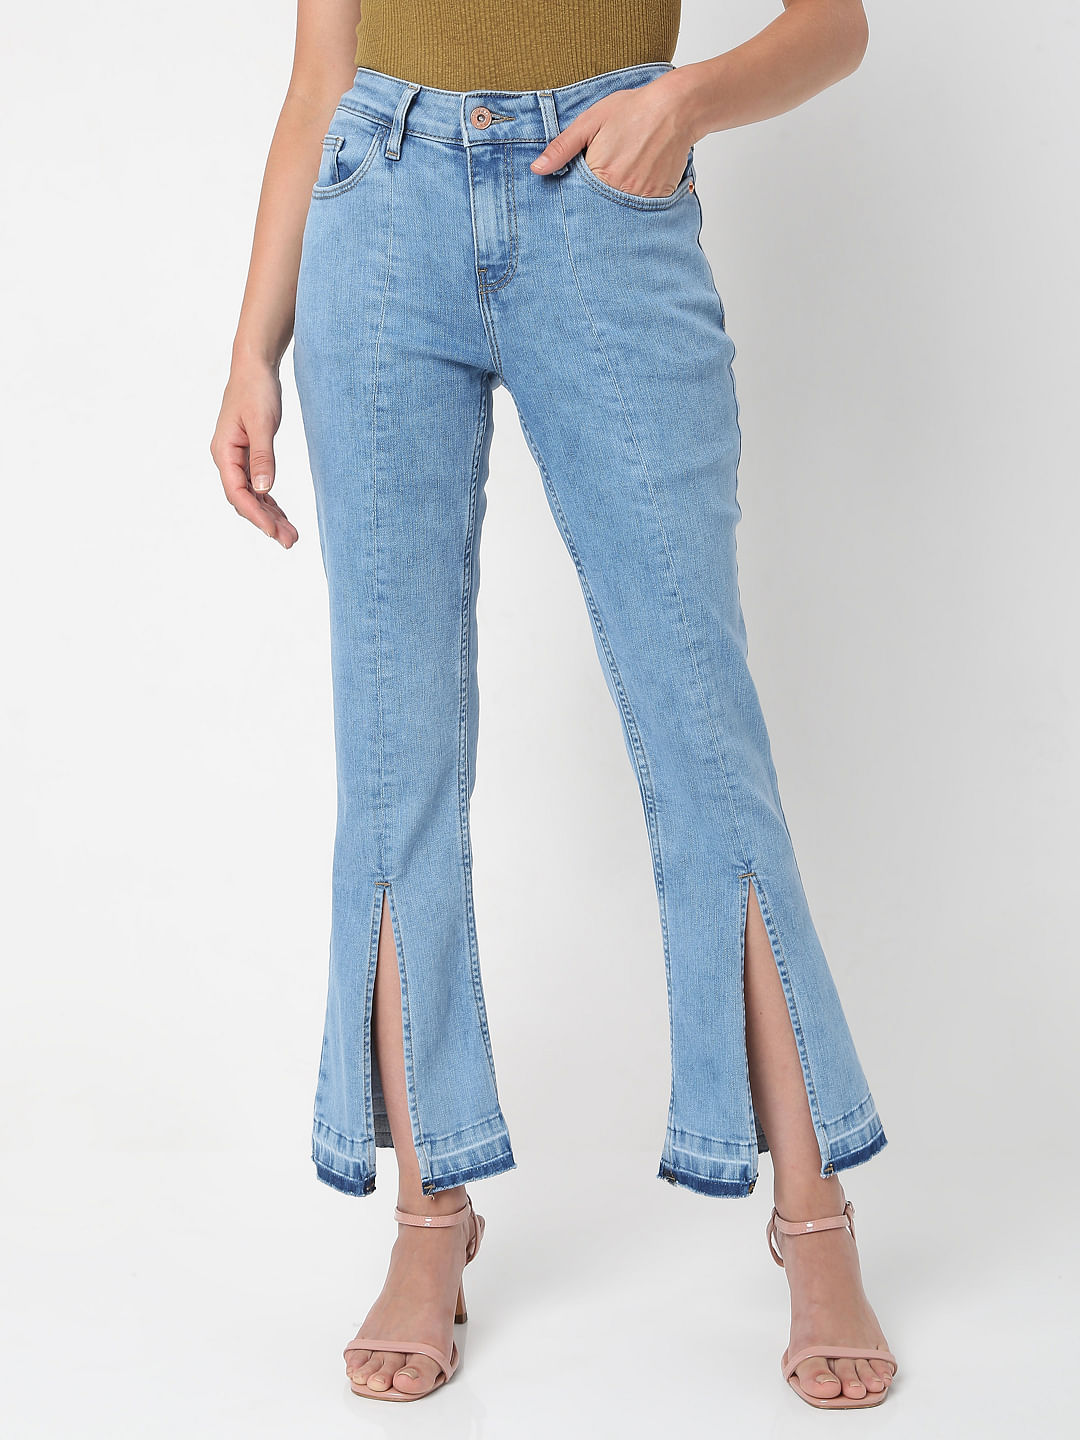 Bootcut Jeans for Women  Buy Womens Bootcut Jeans Online  American Eagle  India